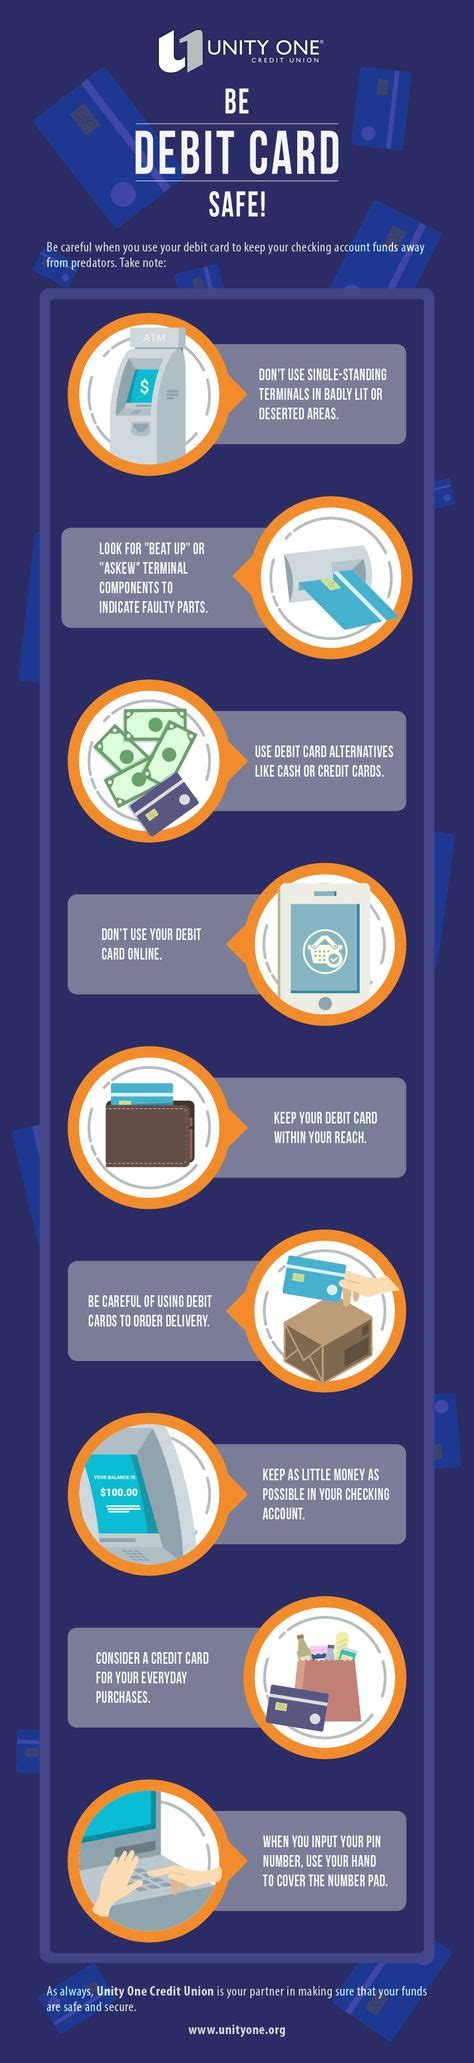 How To Be Debit Card Safe Infographic Cards Infographic Finance